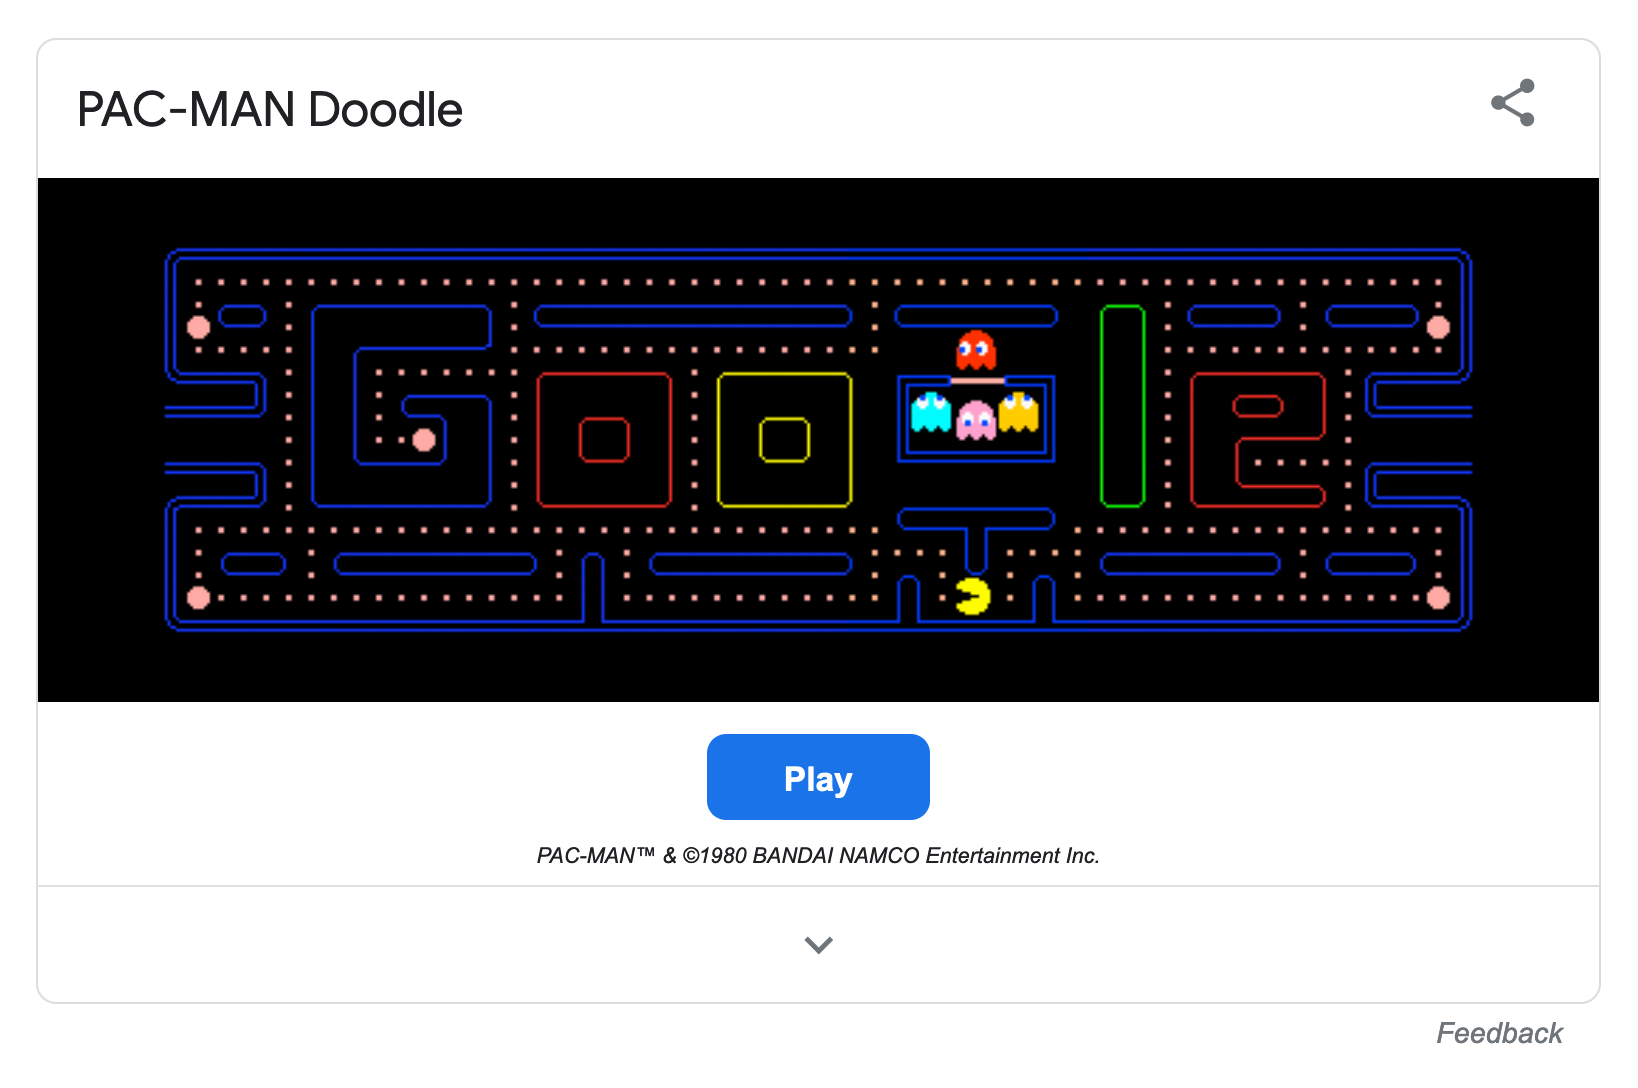 PacMan in Google search results